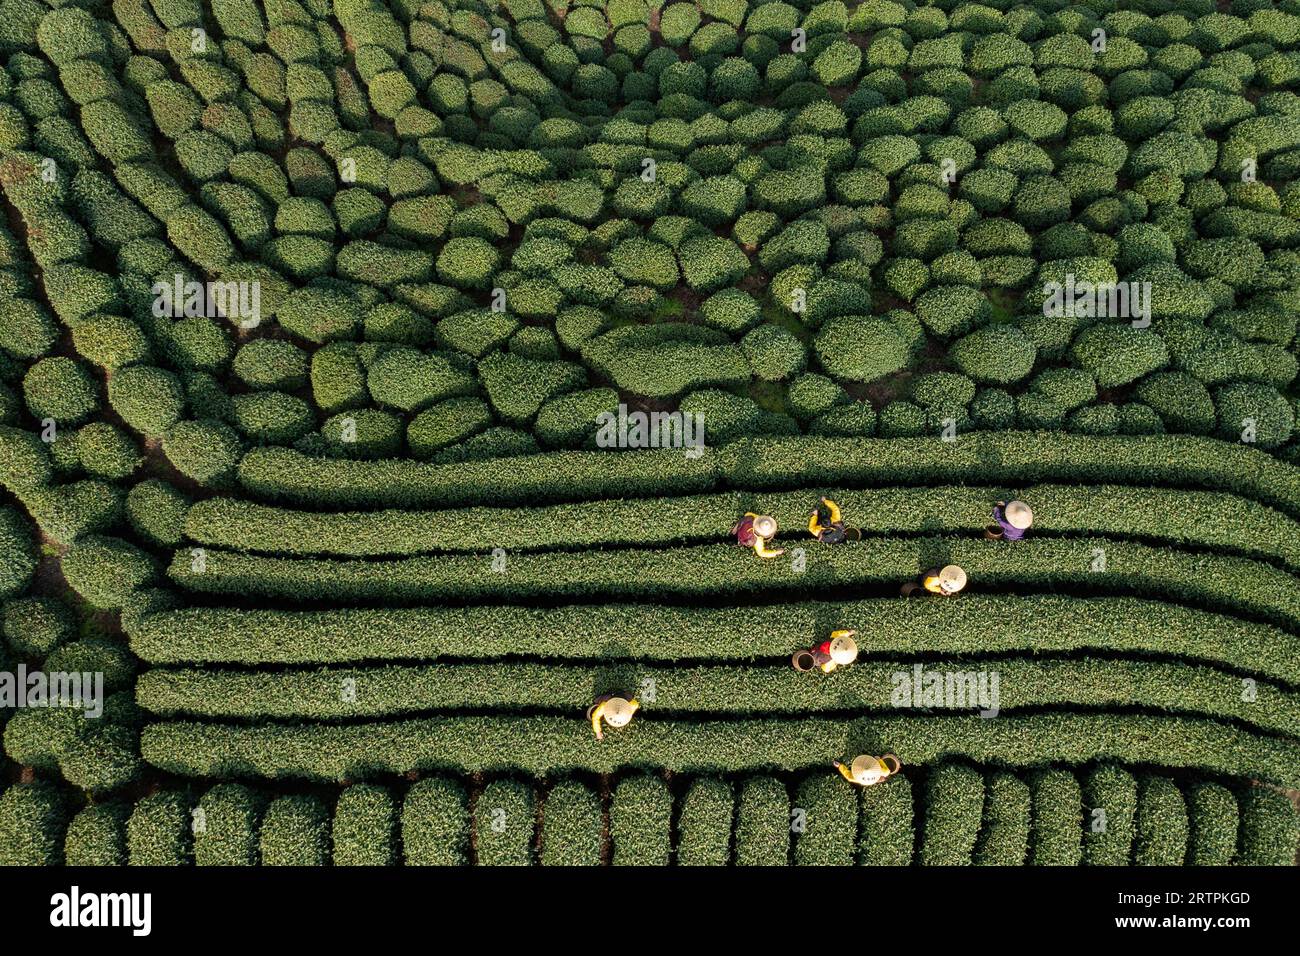 Hangzhou. 13th Mar, 2023. This aerial photo taken on March 13, 2023 shows farmers picking tea leaves at a tea garden in Hangzhou, east China's Zhejiang Province. The 19th Asian Games will take place in Hangzhou between September 23 and October 8, featuring a total of 40 sports. It will be the third Asian Games to be hosted in China, after Beijing 1990 and Guangzhou 2010. The highly anticipated Asian Games can help boost the popularity of Hangzhou where history and modernity co-exist and further promote its culture. Credit: Xu Yu/Xinhua/Alamy Live News Stock Photo